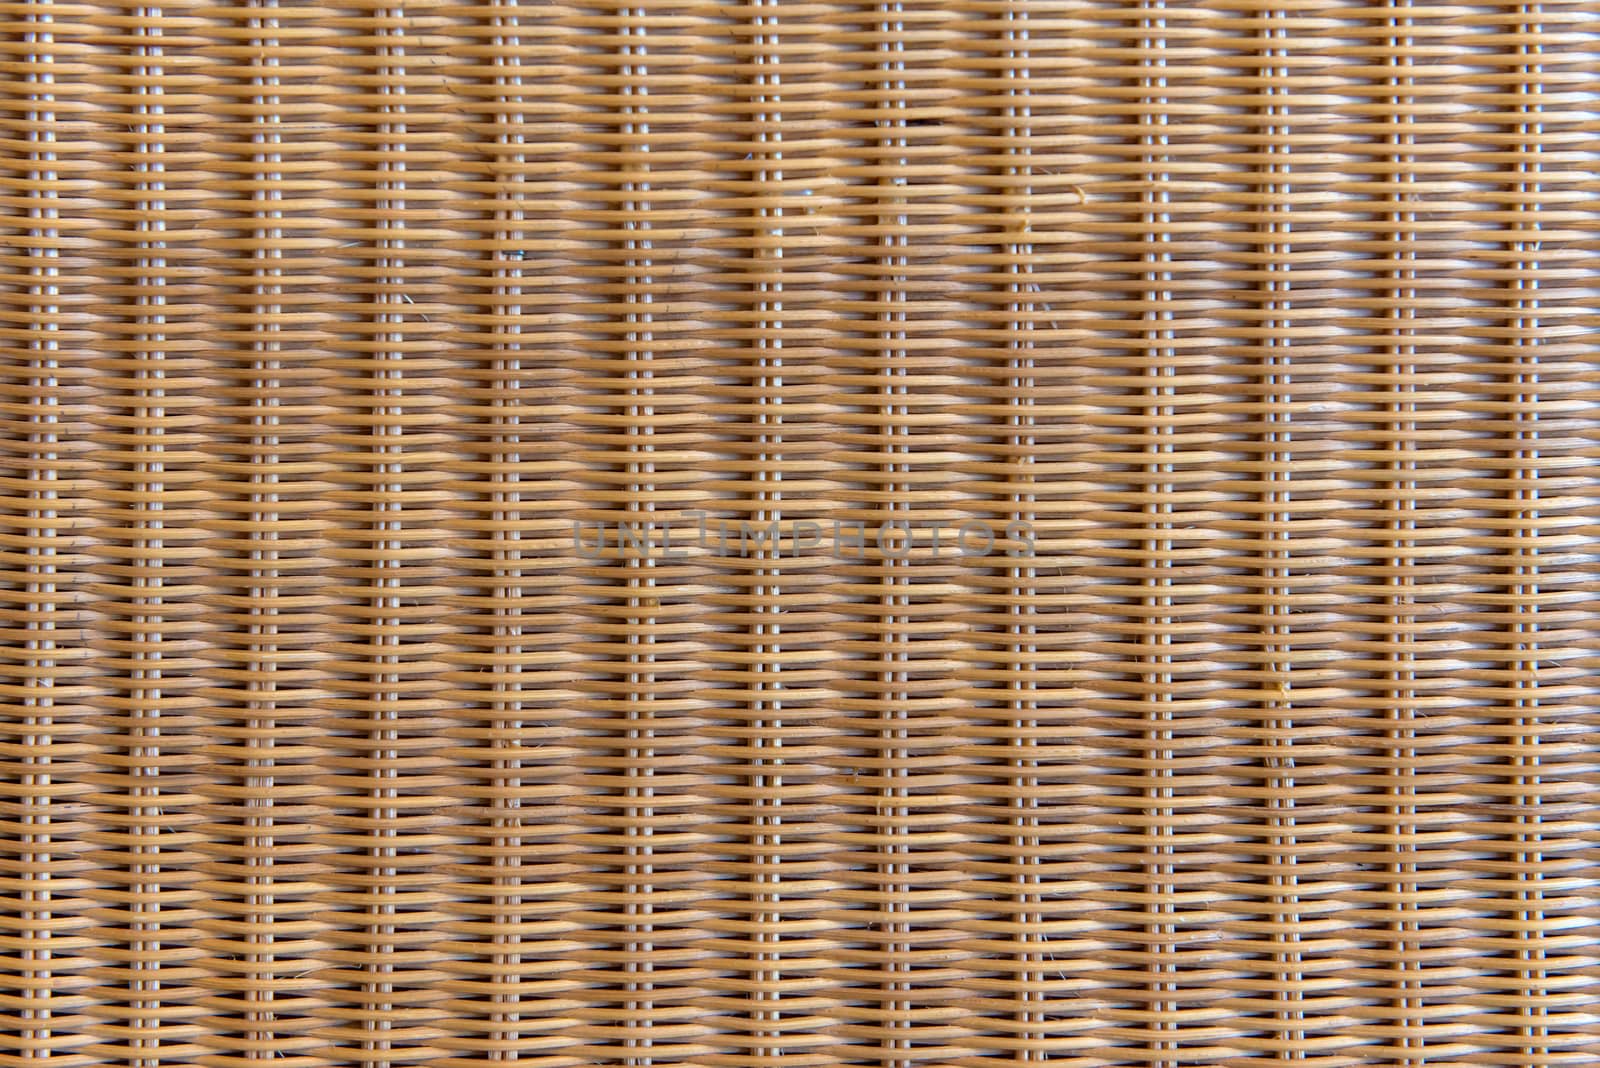 handcraft bamboo weave texture for background.